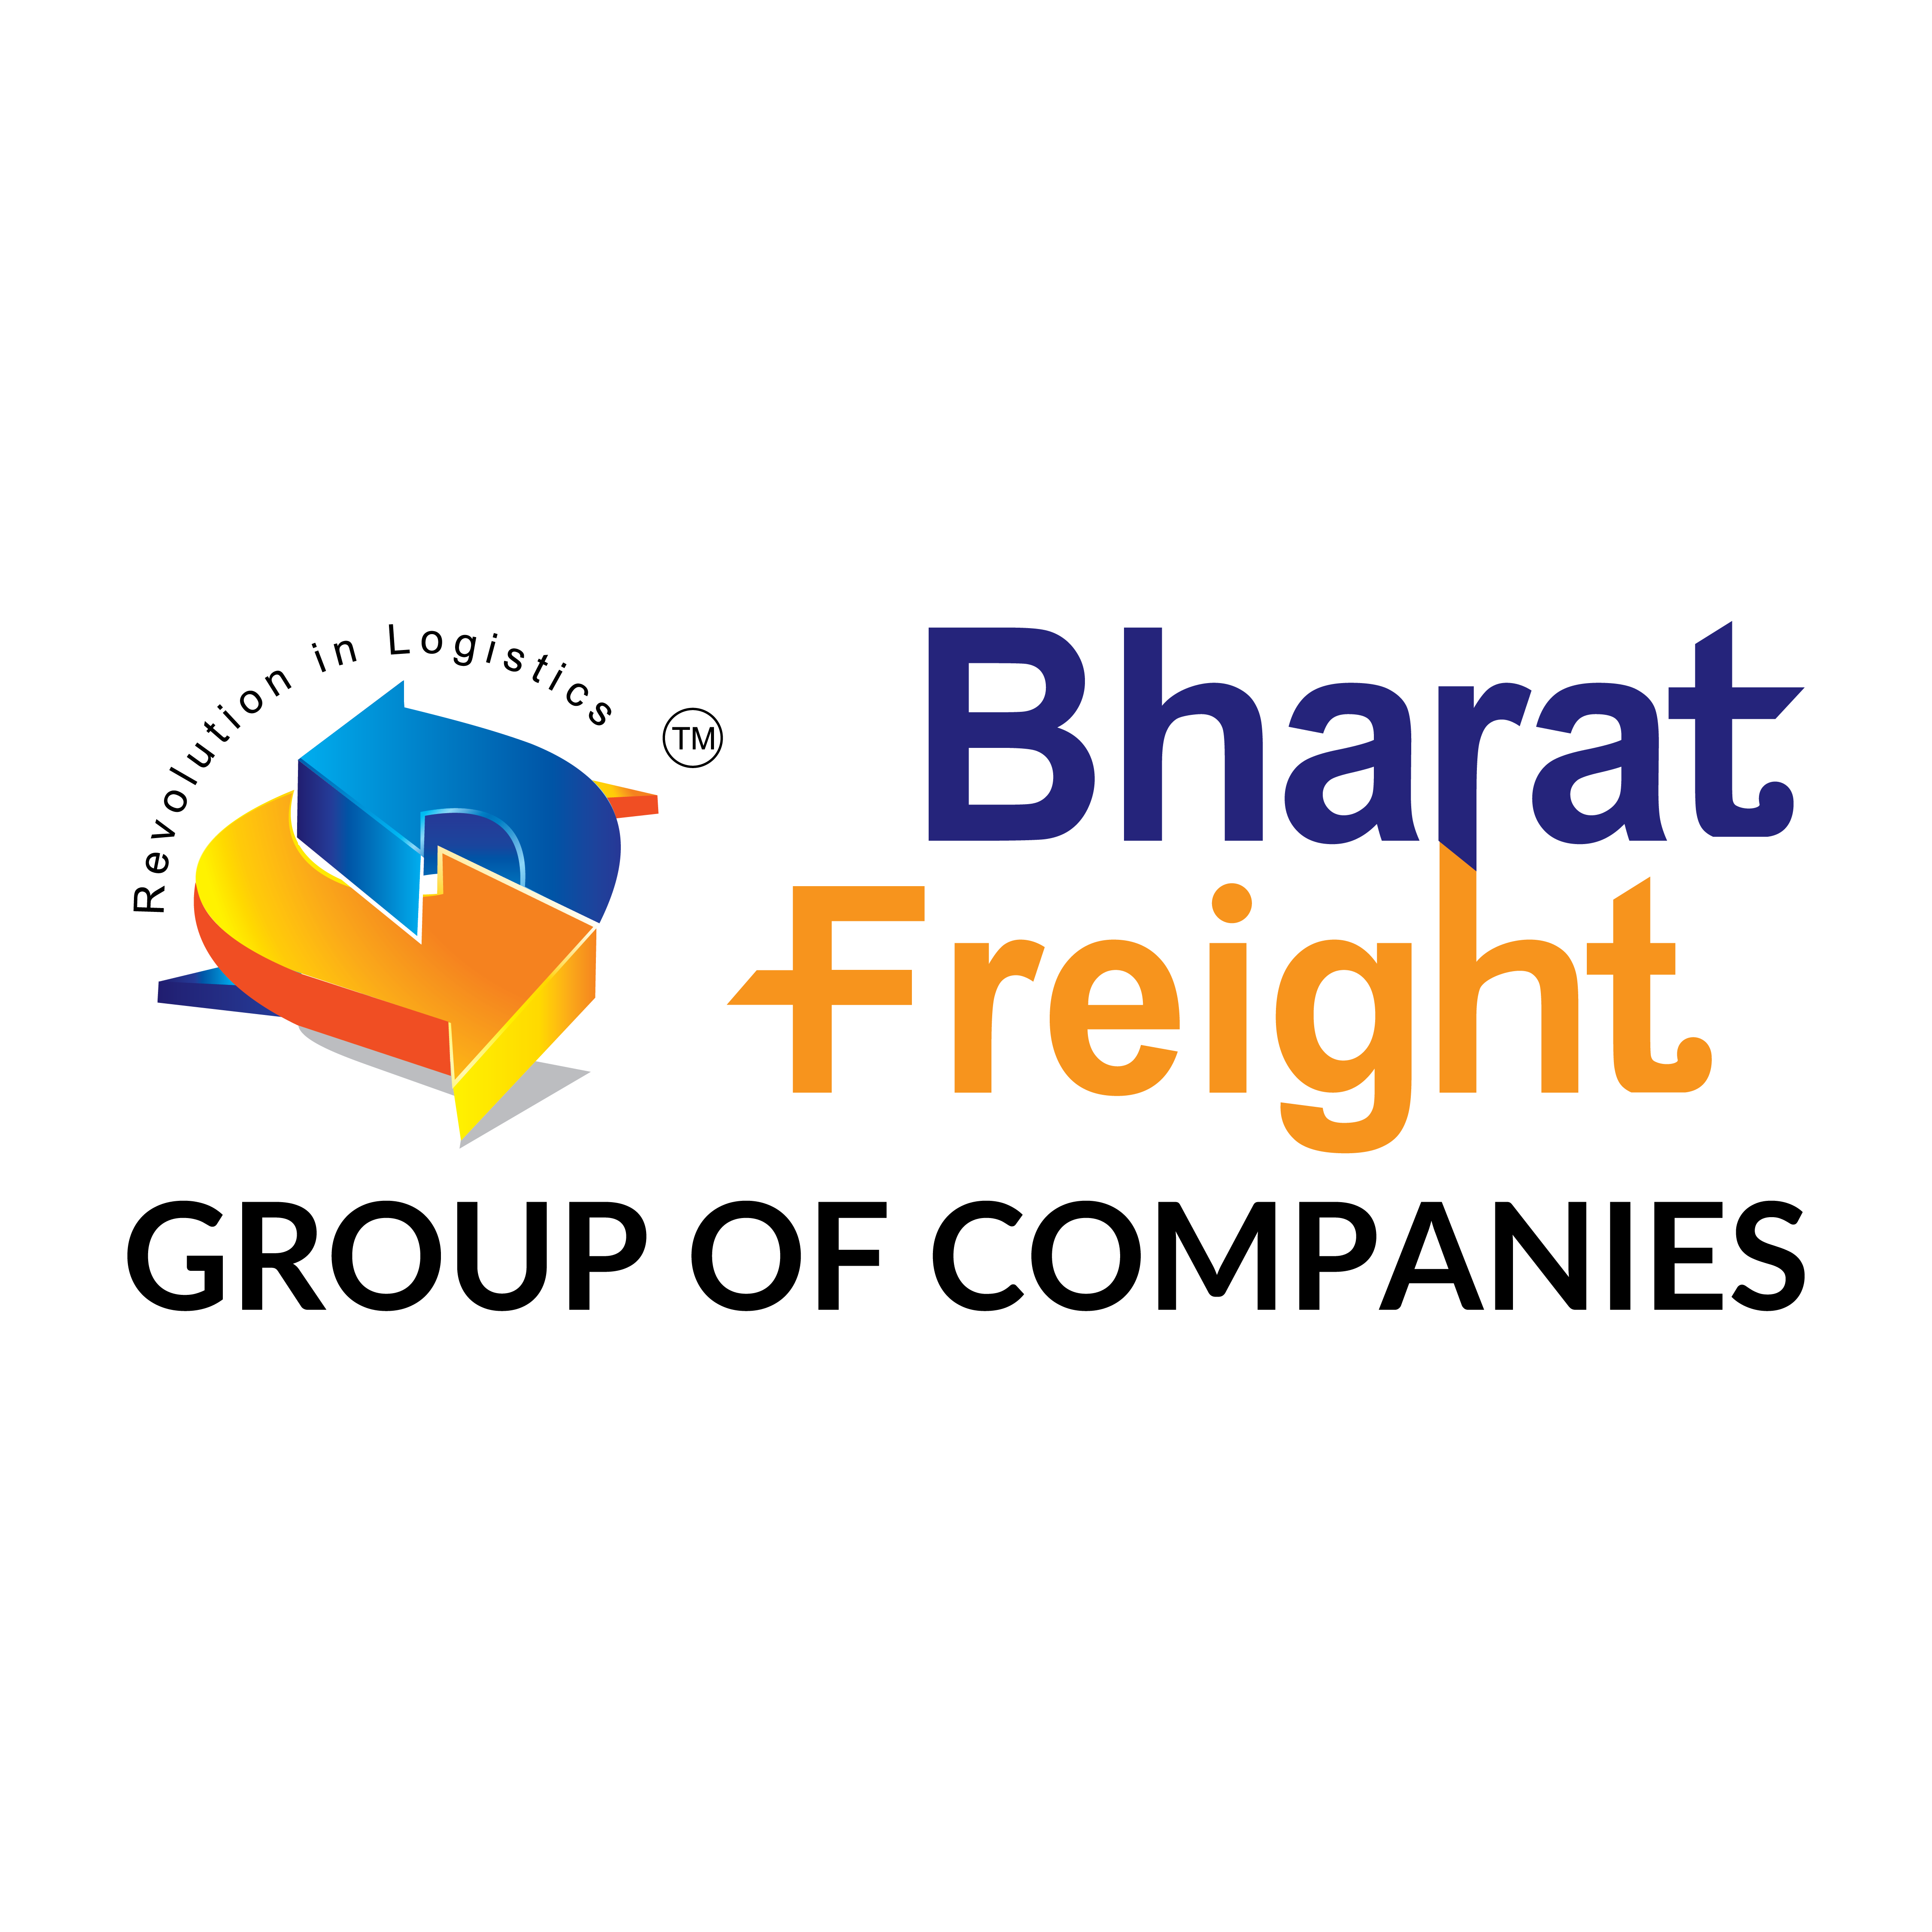 BHARAT FREIGHT GROUP